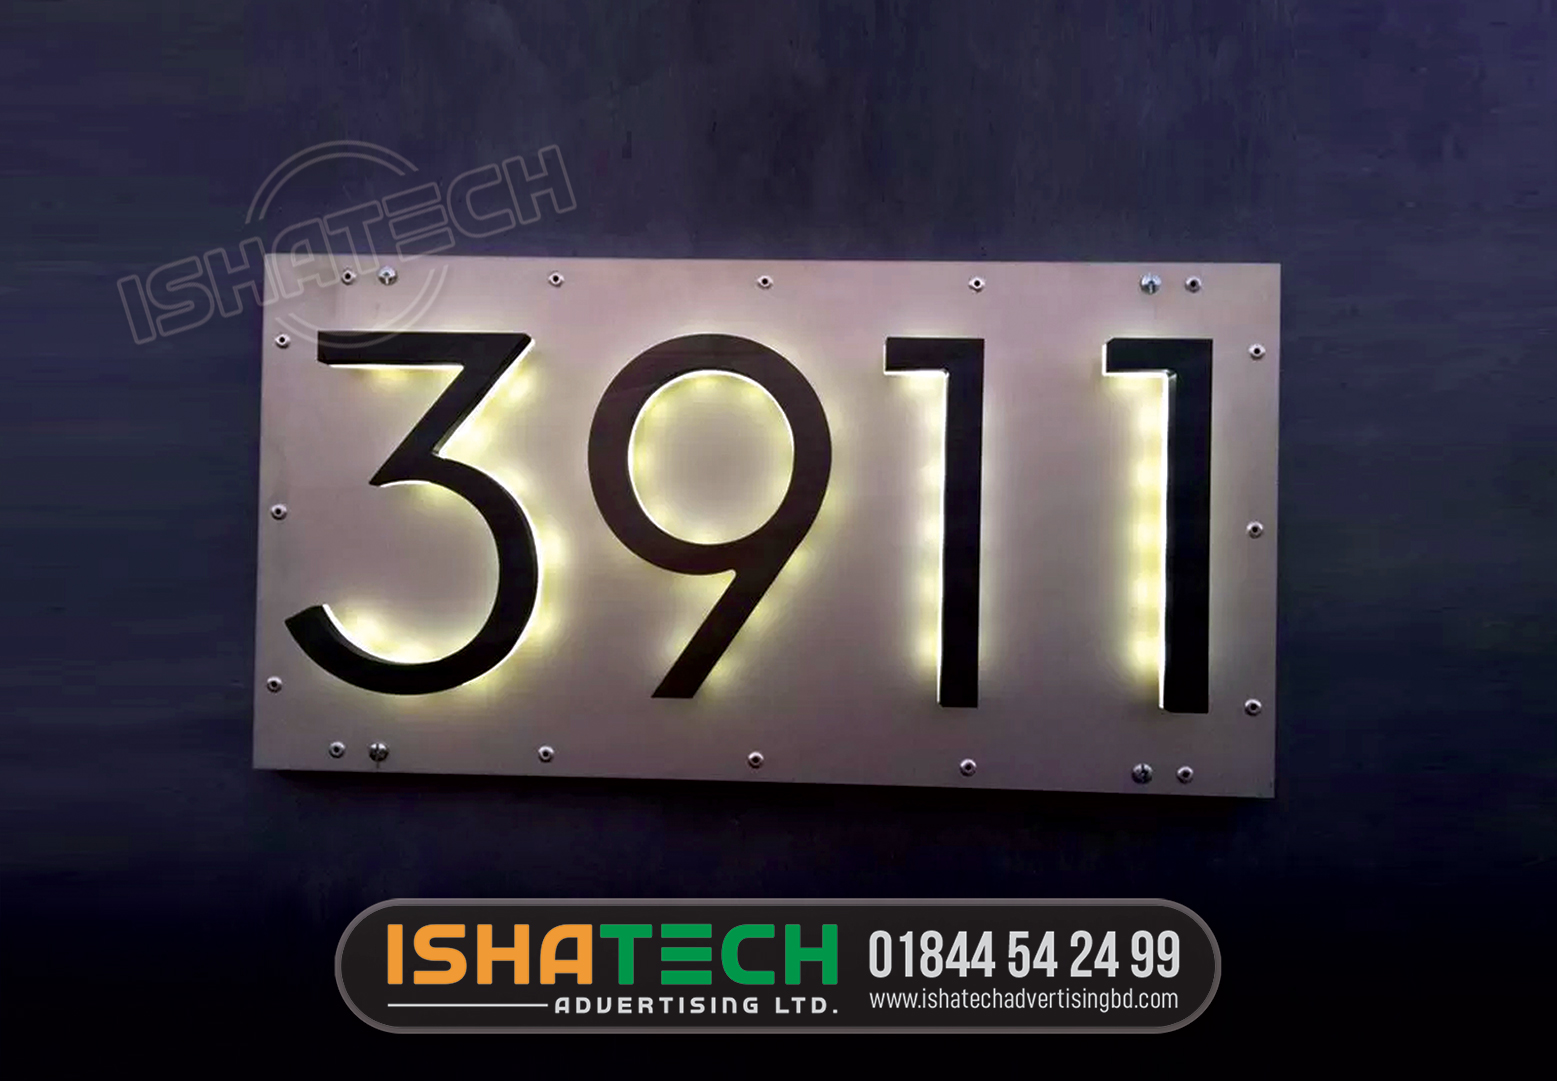 3911 HOUSE NUMBER PLATE, HOME NAMEPLATE, NEW HOME NAMEPLATE, ACRYLIC BACKLIT LETTER NAMEPLATE MAKER BD,